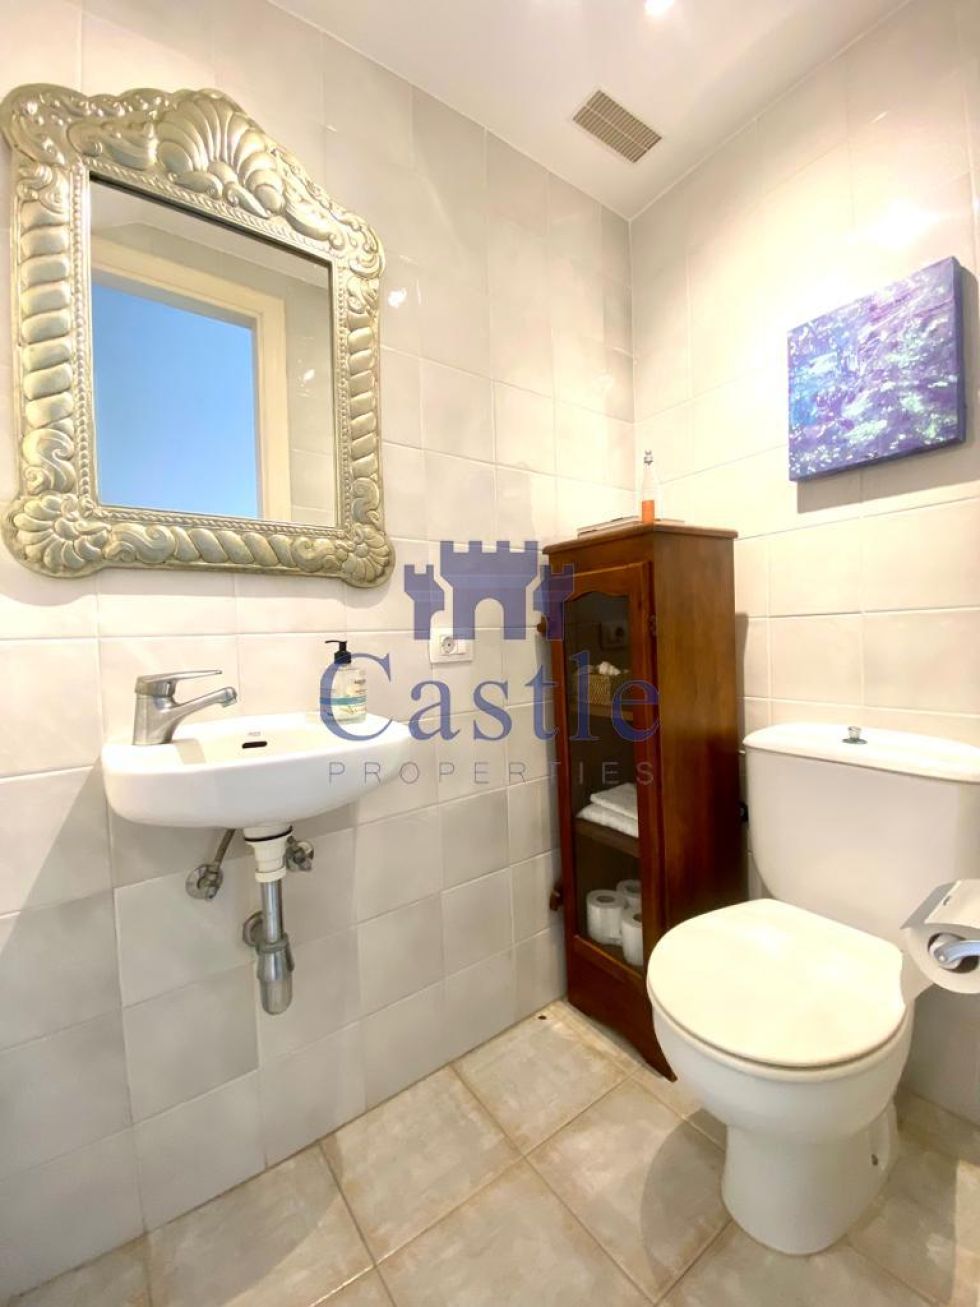 Townhouse for sale in  Arona, Spain - 24060